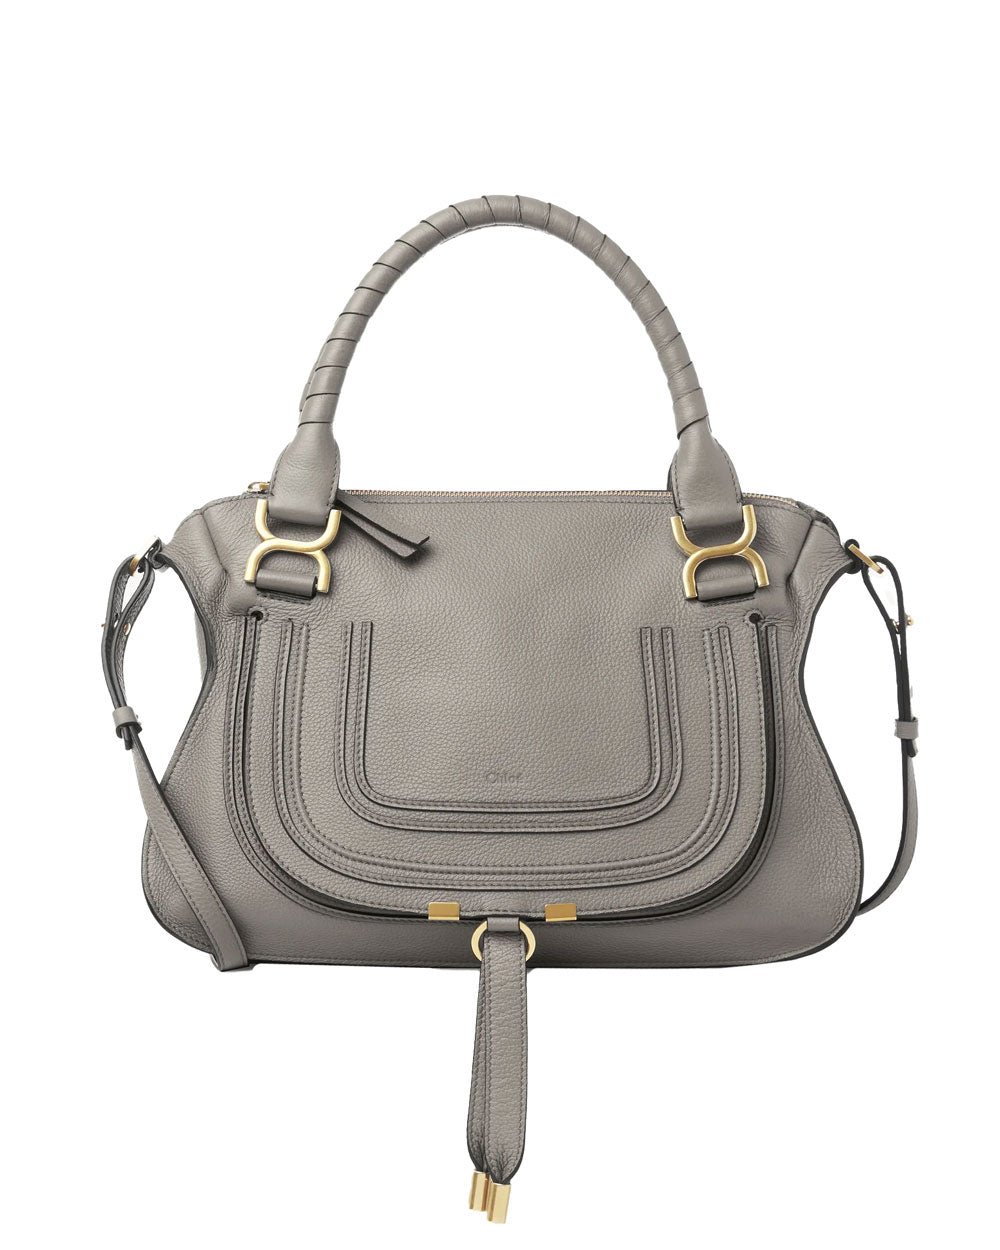 Medium Marcie Double Carry Bag in Cashmere Grey